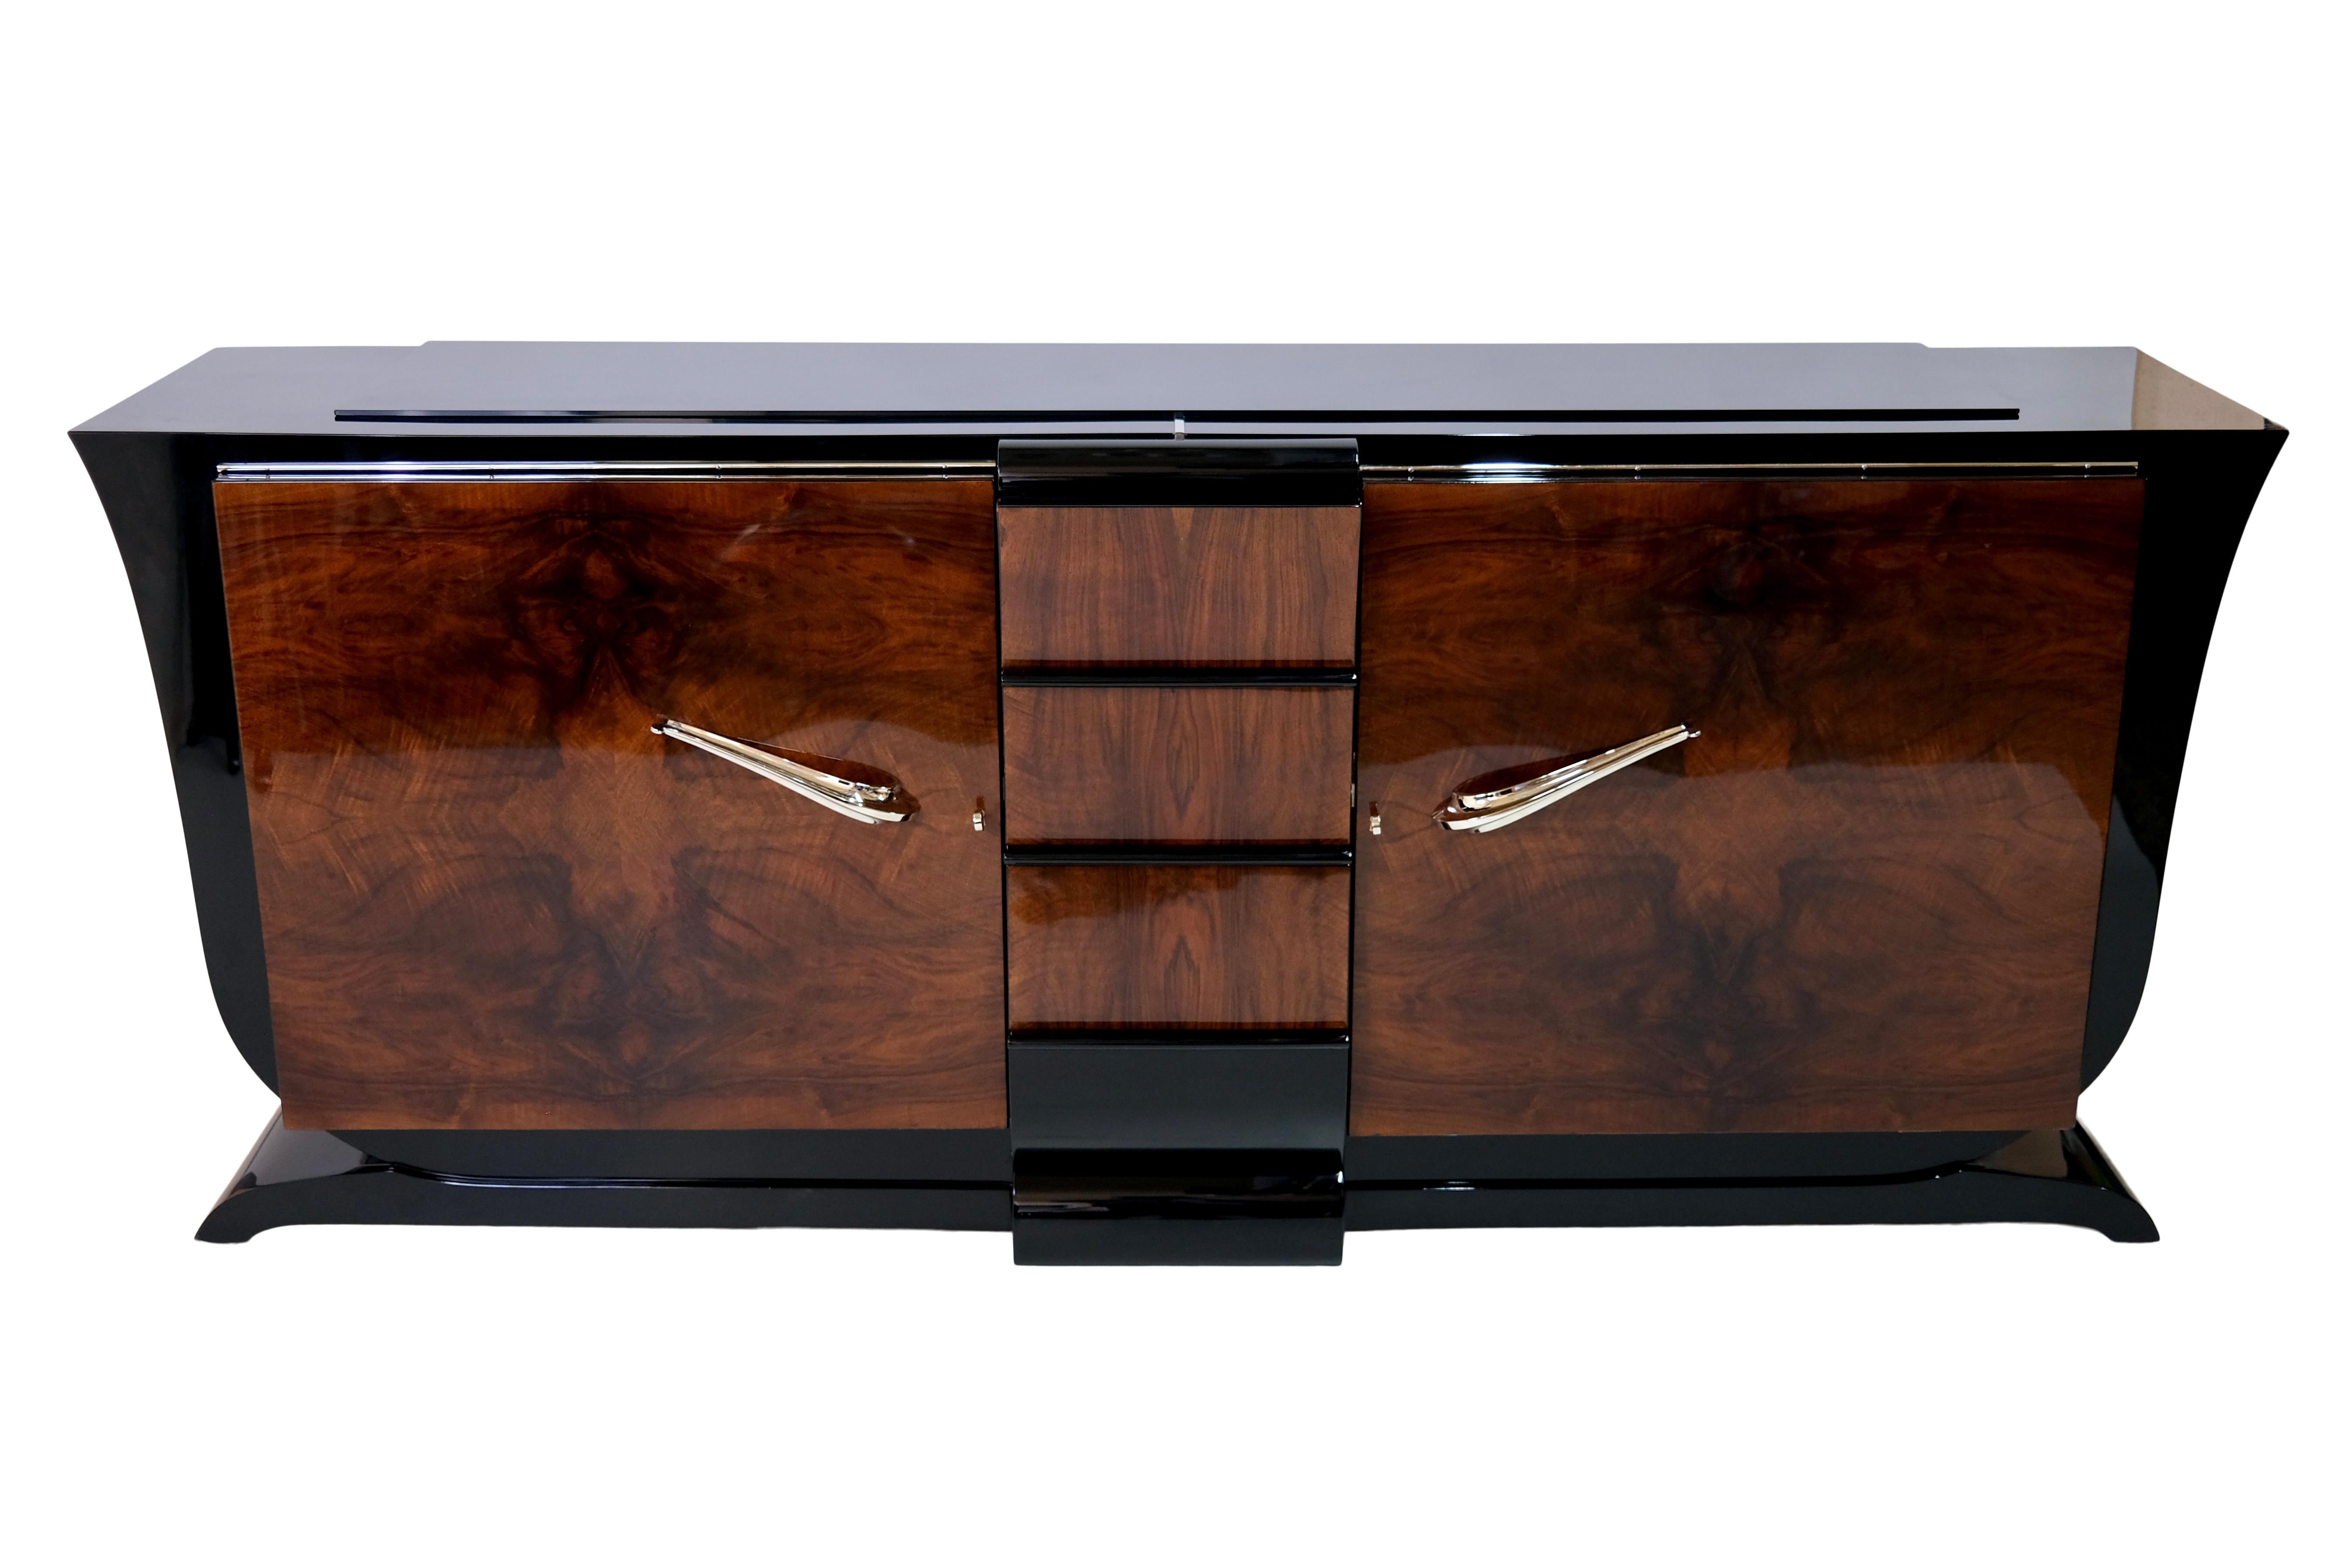 Sideboard with curved sides in typical shape  
Two hinged doors 
Drawers in the middle part 
Fronts in nut wood, high gloss lacquer 
Body in black piano lacquer, high gloss 
Original handles, freshly nickel plated 

Original Art Deco, France